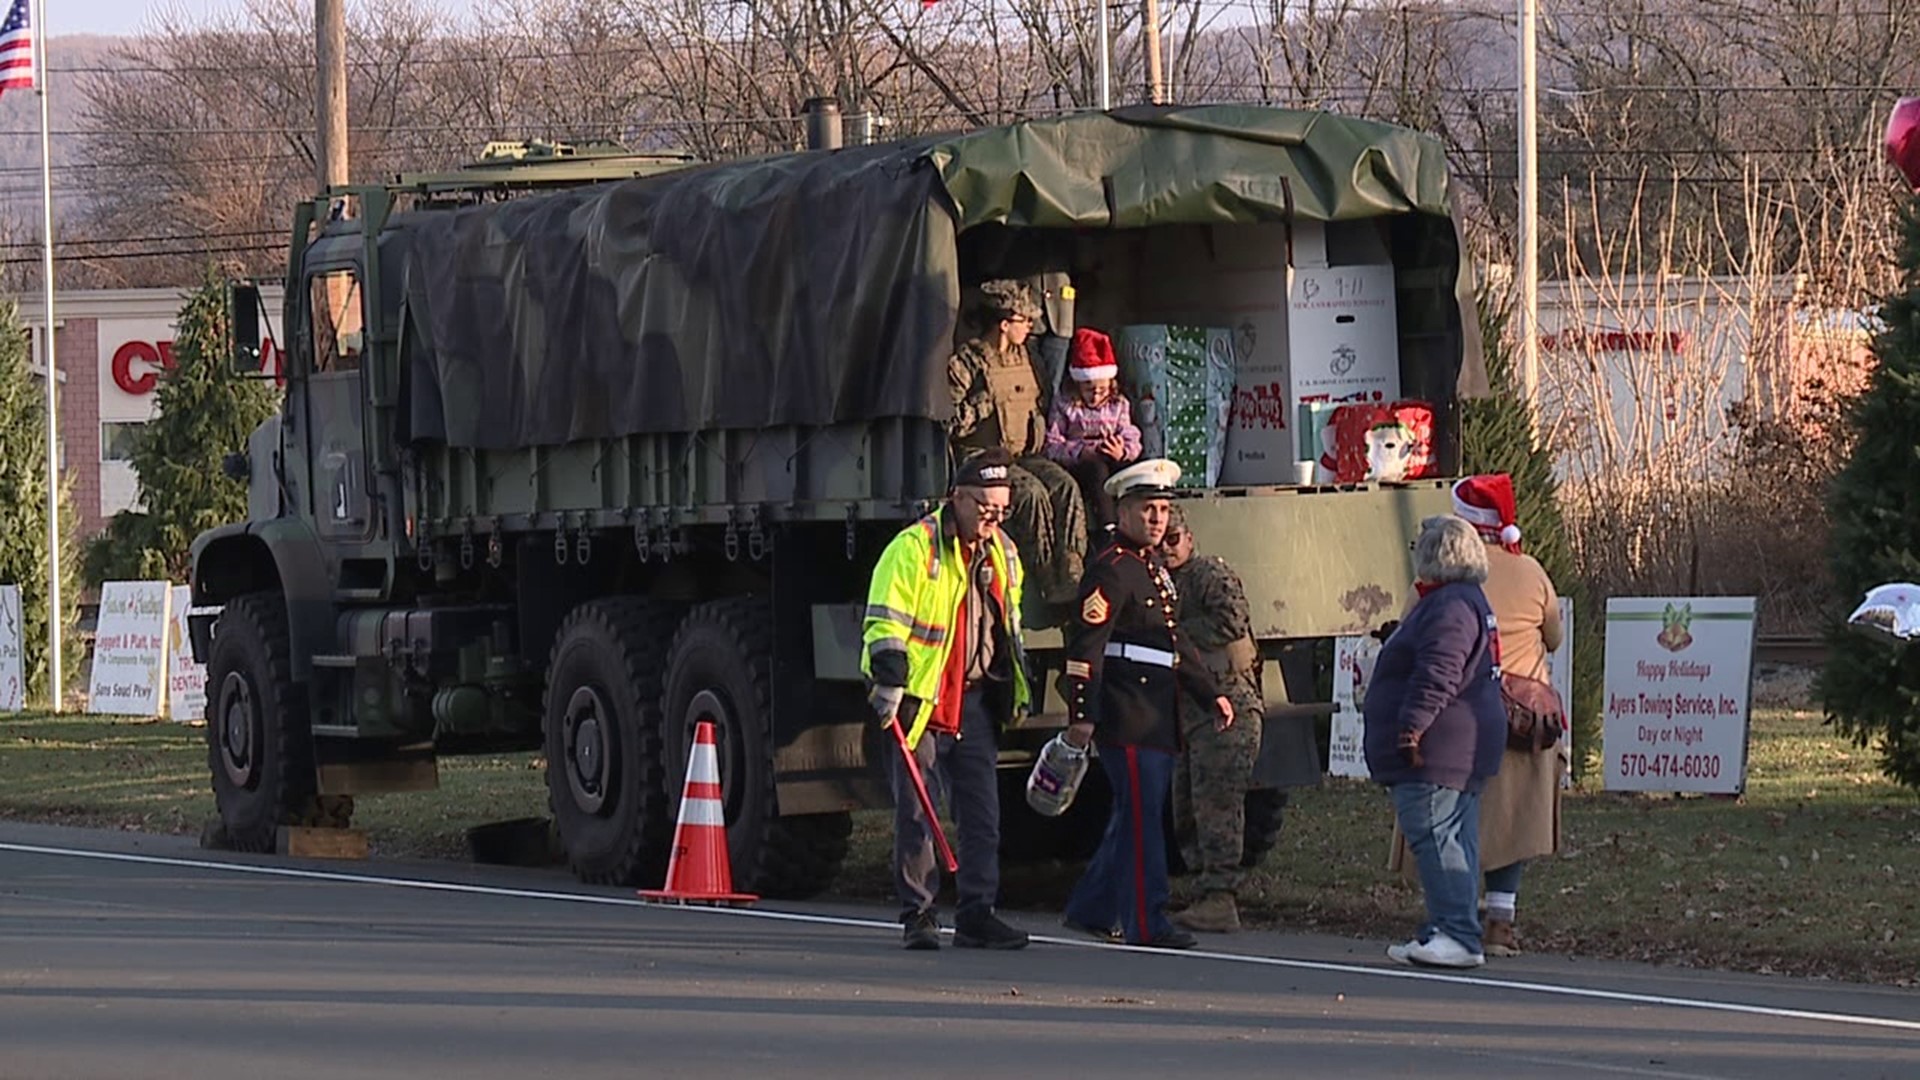 Folks came out to support Toys for Tots Sunday afternoon along Carey Avenue in Hanover Township.